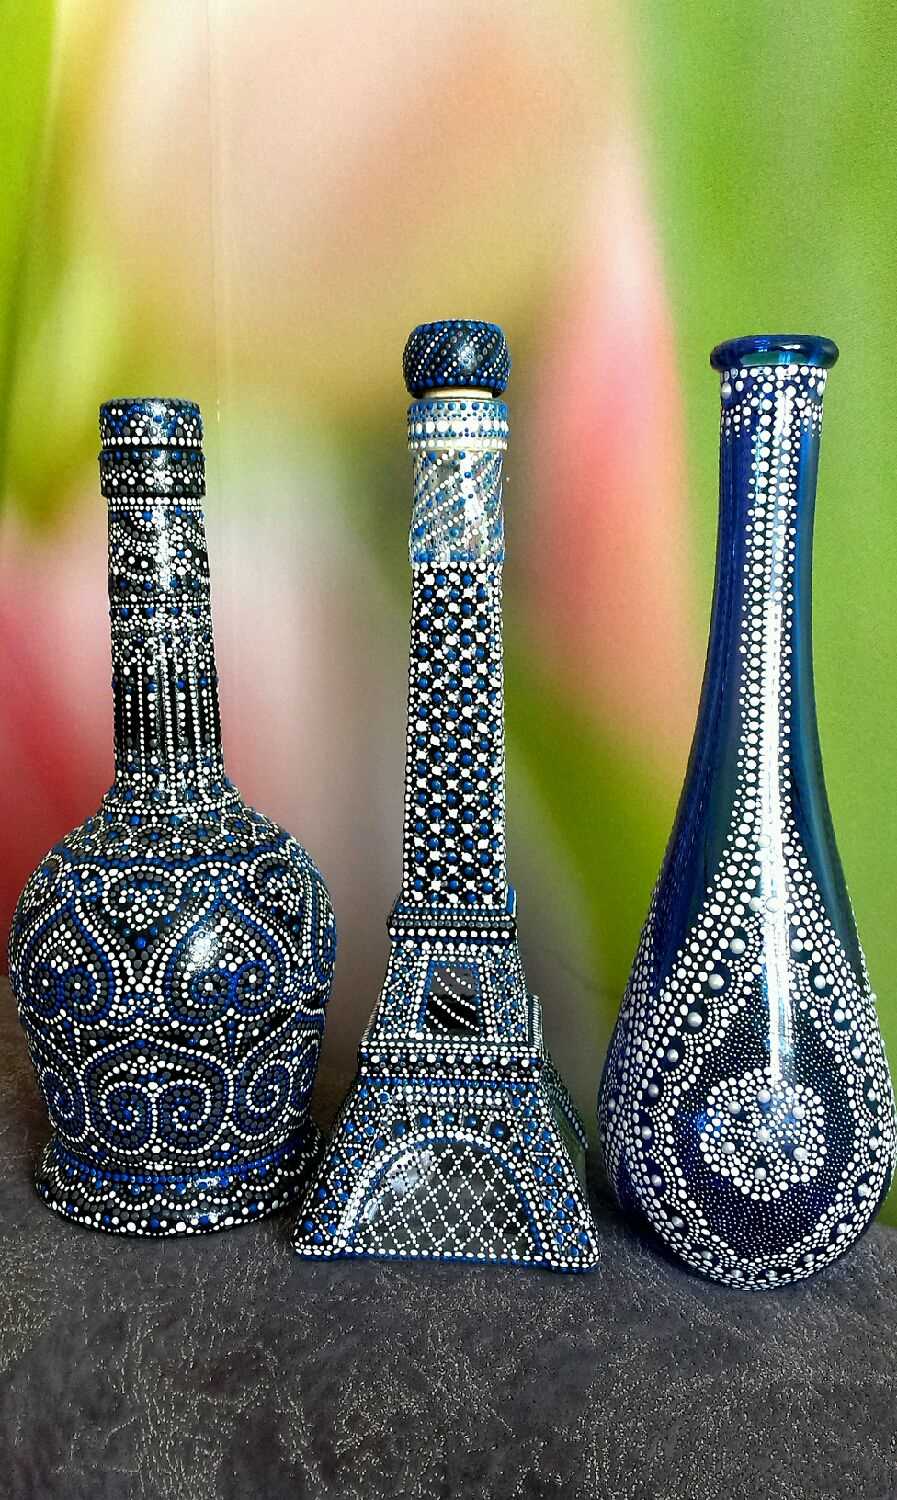 a variant of beautiful decoration of glass bottles with beads